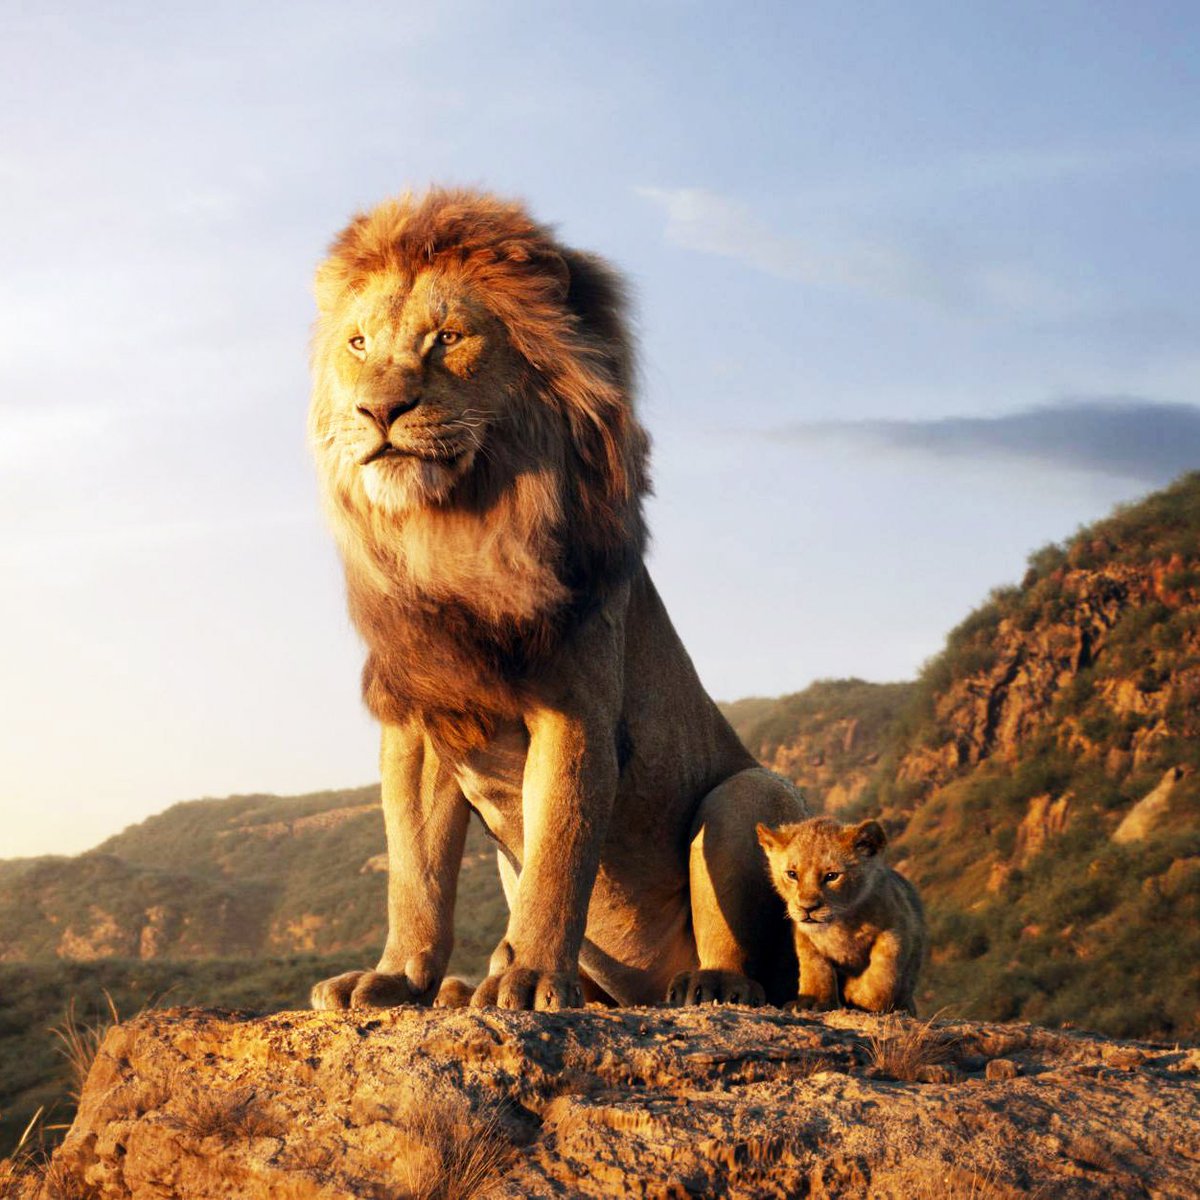 Disney shows the first teaser for #Mufasa: #TheLionKing at #CinemaCon: It starts with the iconic opening of 'Circle of Life.' 'This story begins far beyond the mountains and the shadows, on the other side of the light,' Rafiki says. He describes Mufasa as 'a lion who would